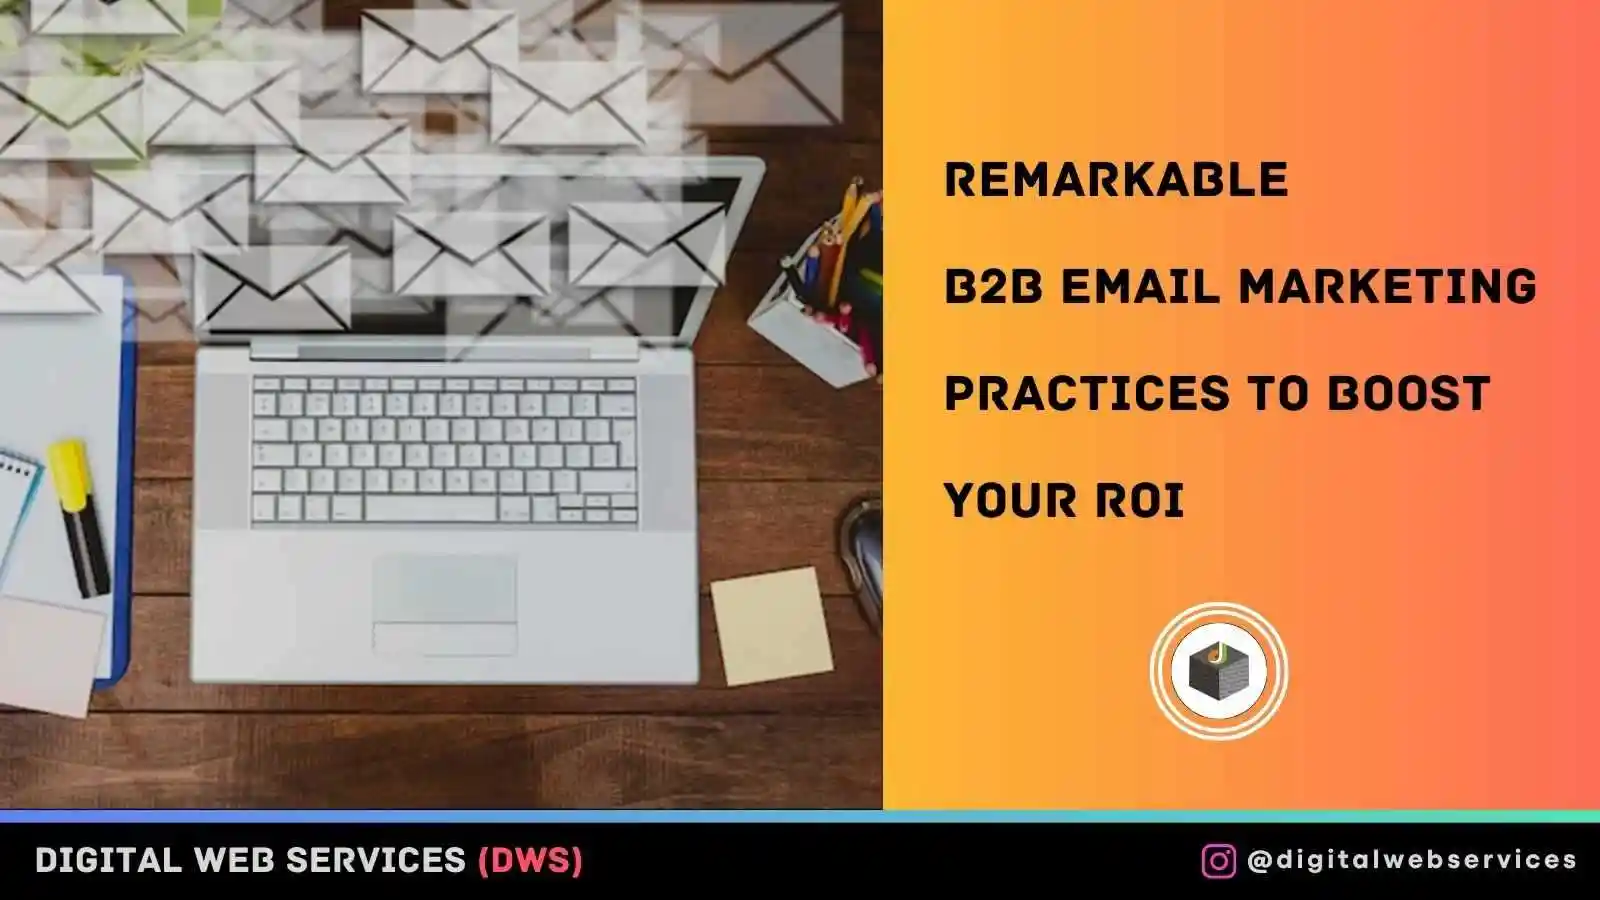 Remarkable B2B Email Marketing Practices To Boost Your ROI